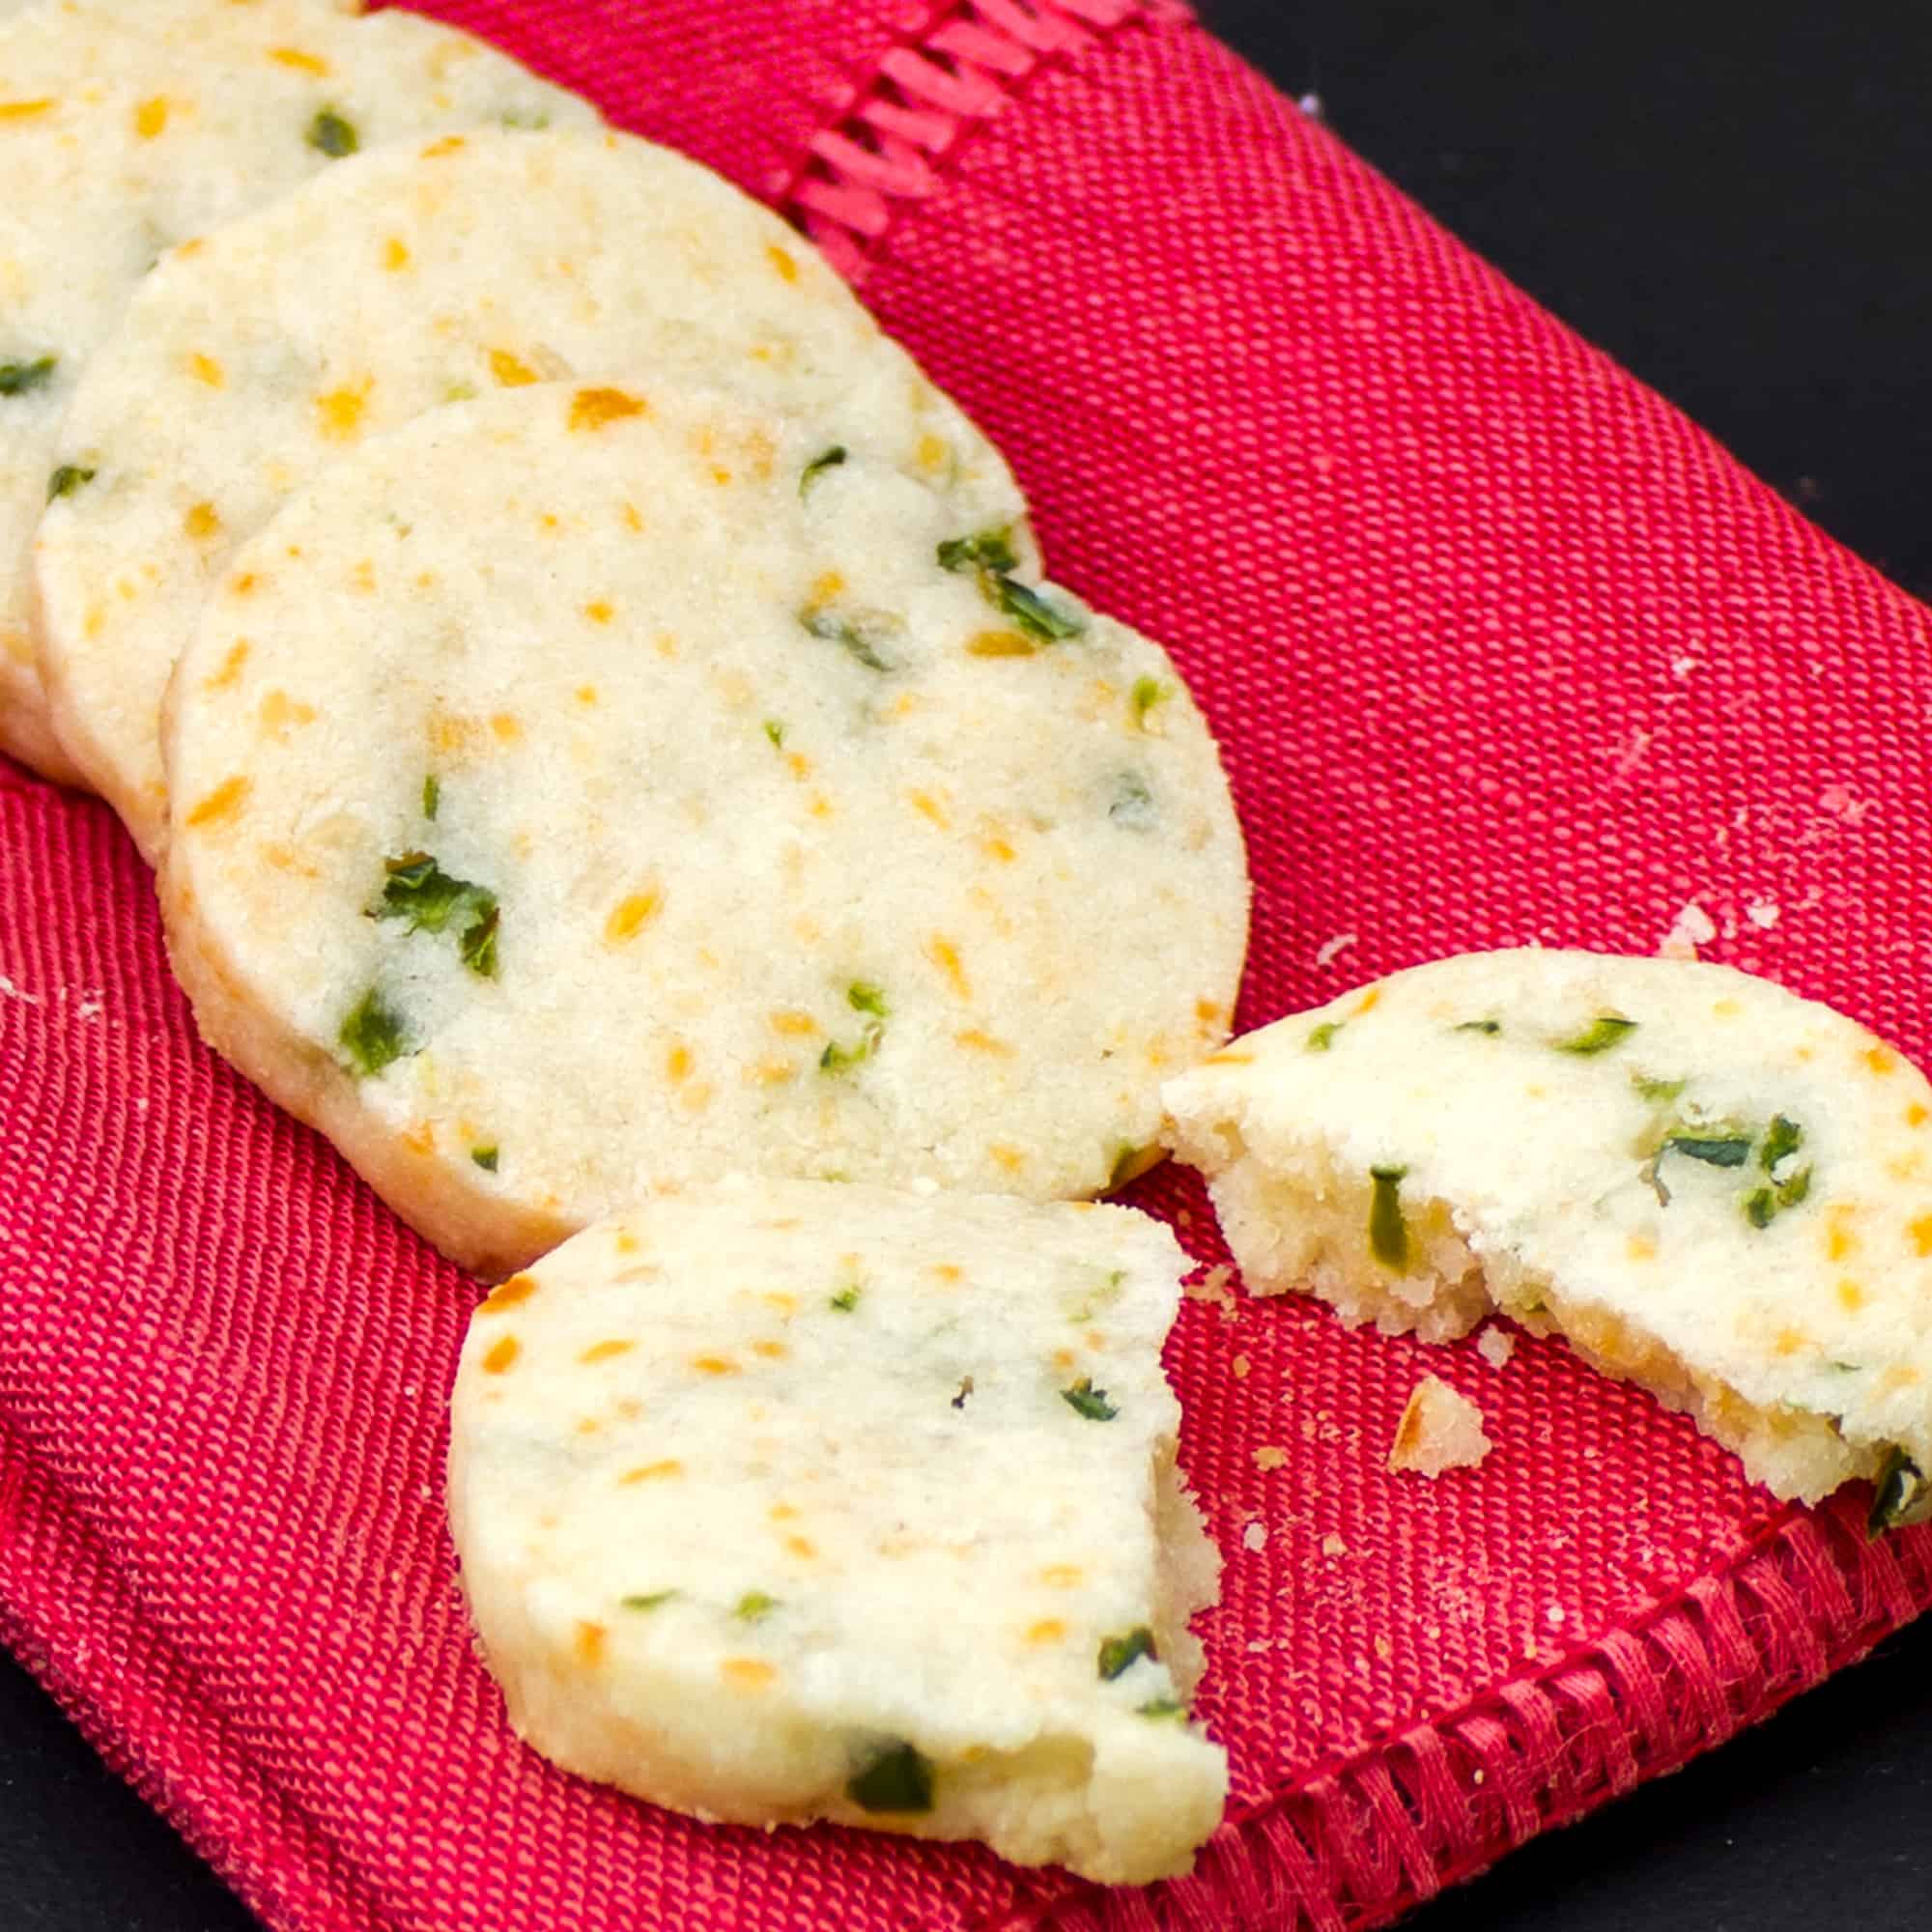 Minced jalapeno pepper and grated cheddar cheese are mixed with shortbread cookie dough to create this savory cookie recipe. These icebox cookies are chilled, cut and then baked.